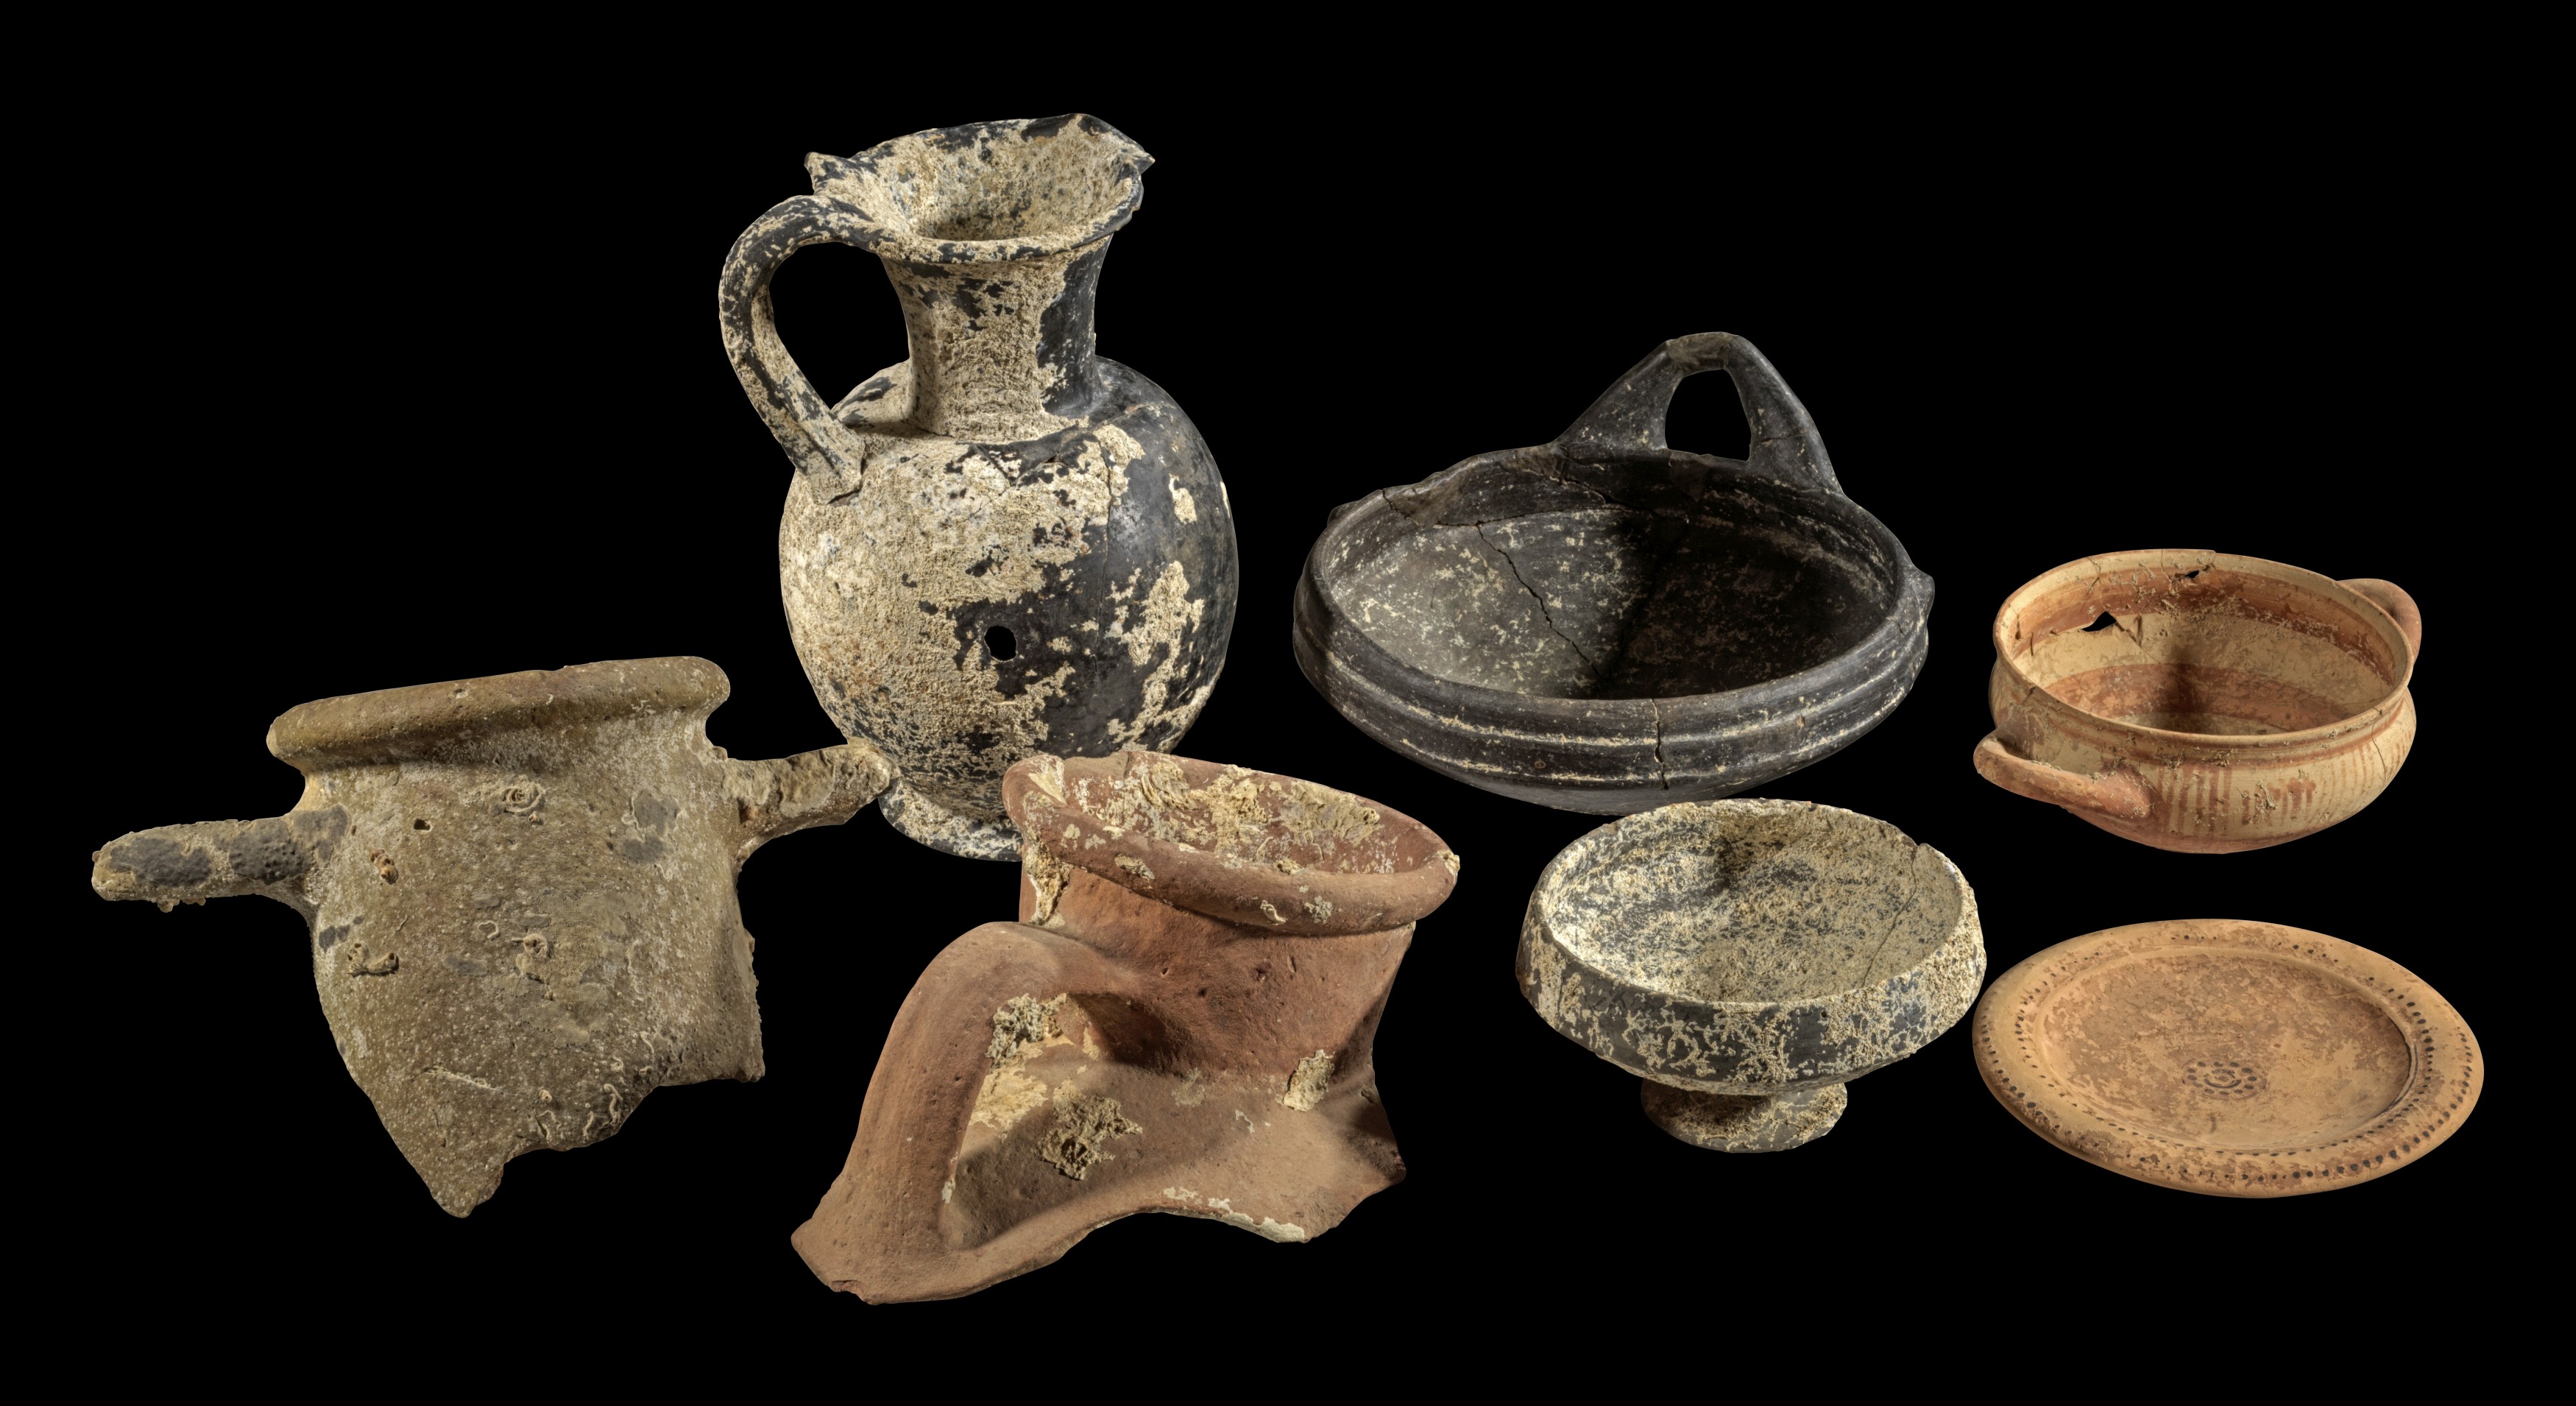 Collection of Ancient Pottery from the Central Mediterranean Area.